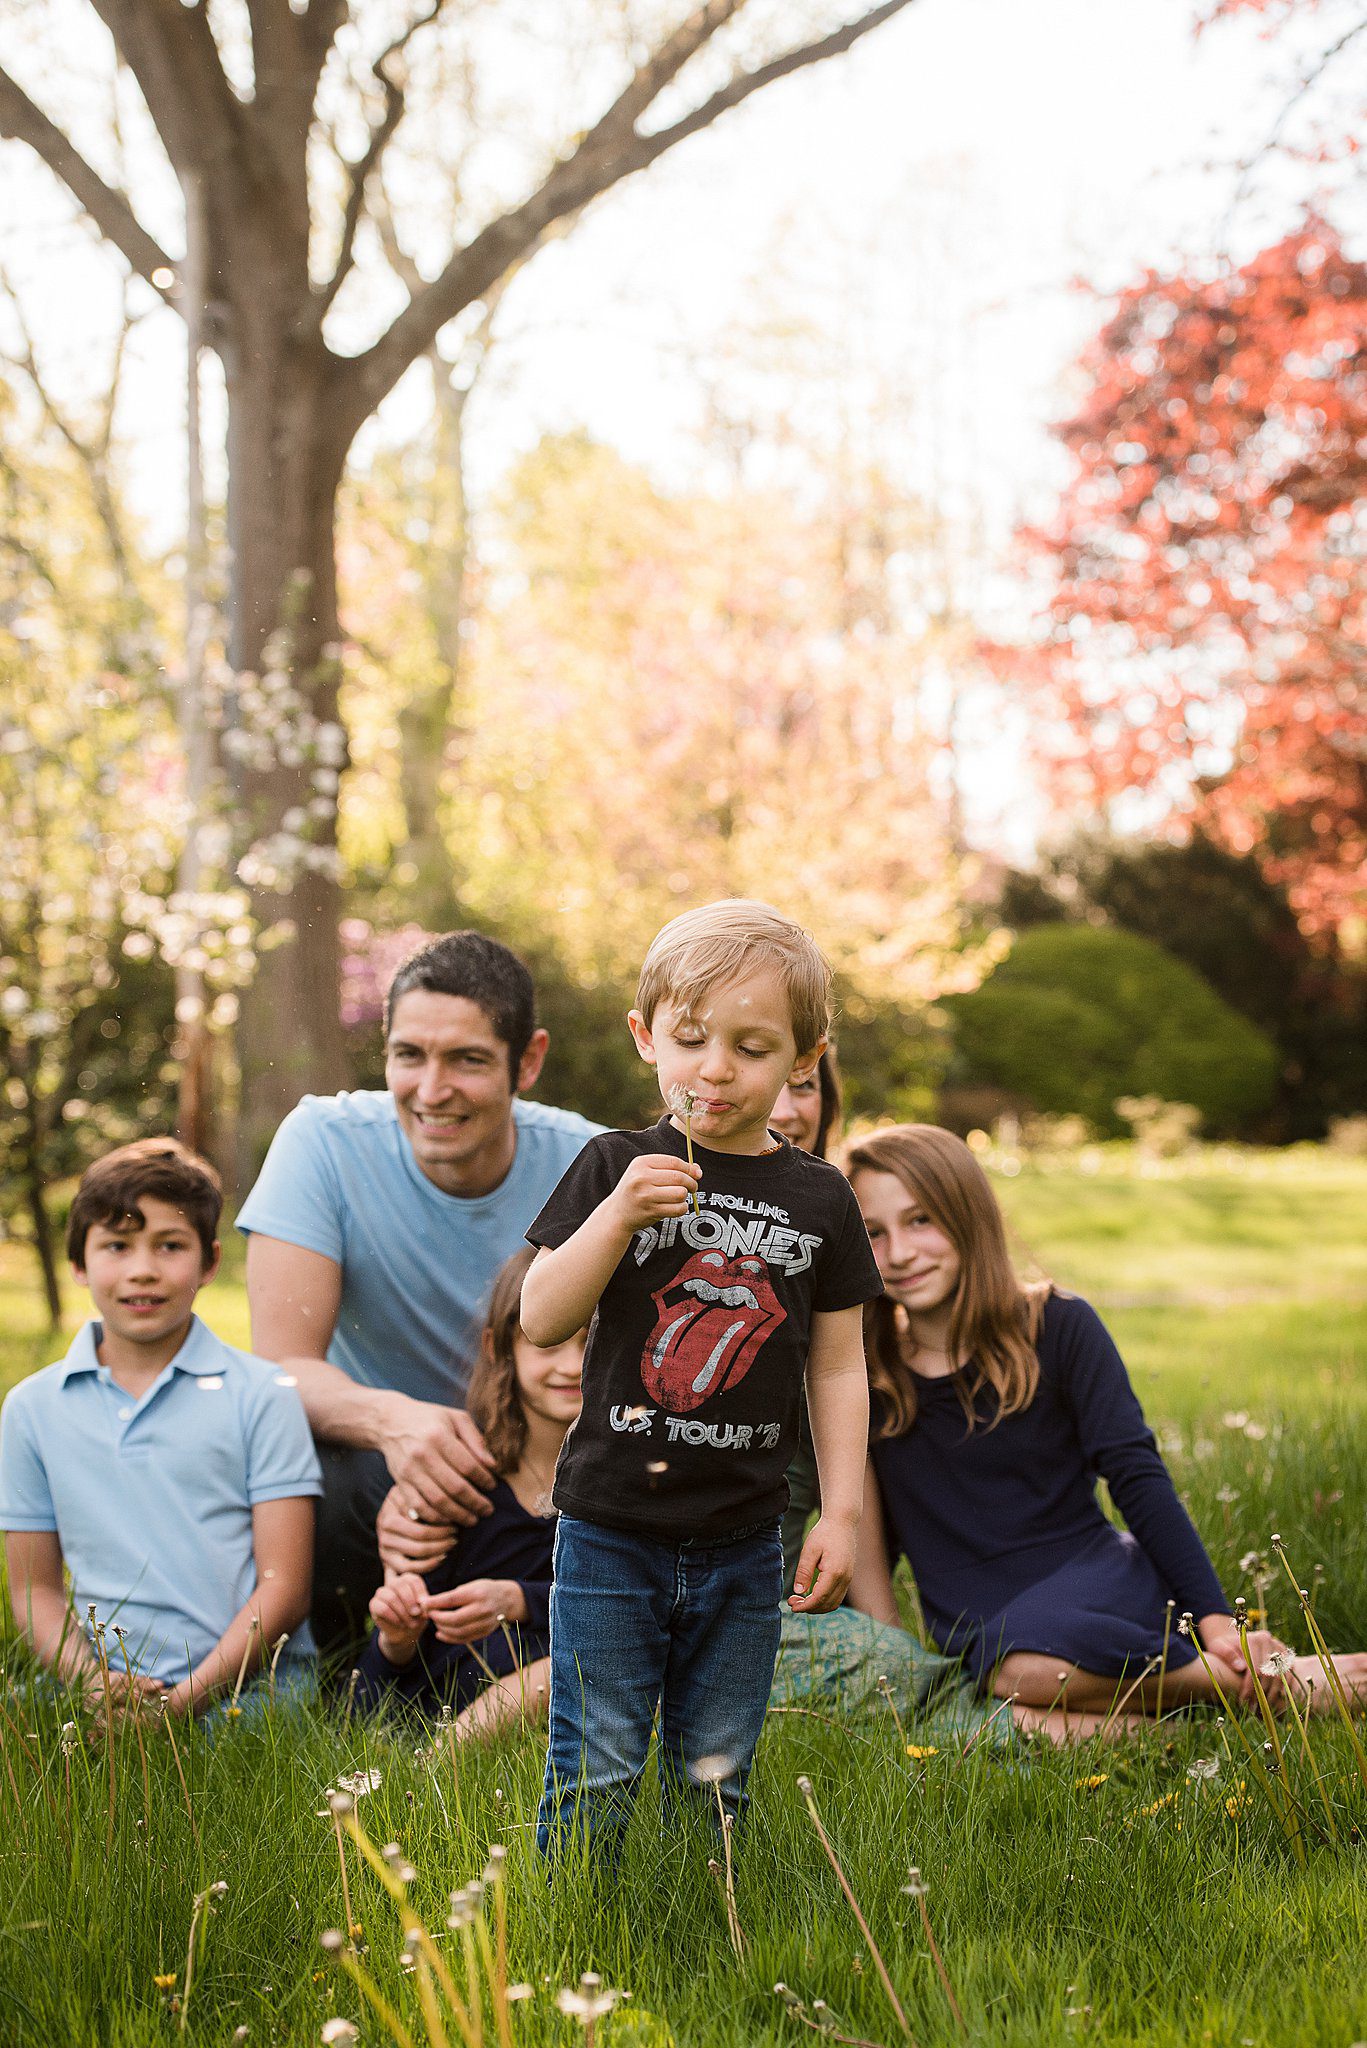 A young boy in a shirt and jeans blows dandelions while his family sits in the grass behind him